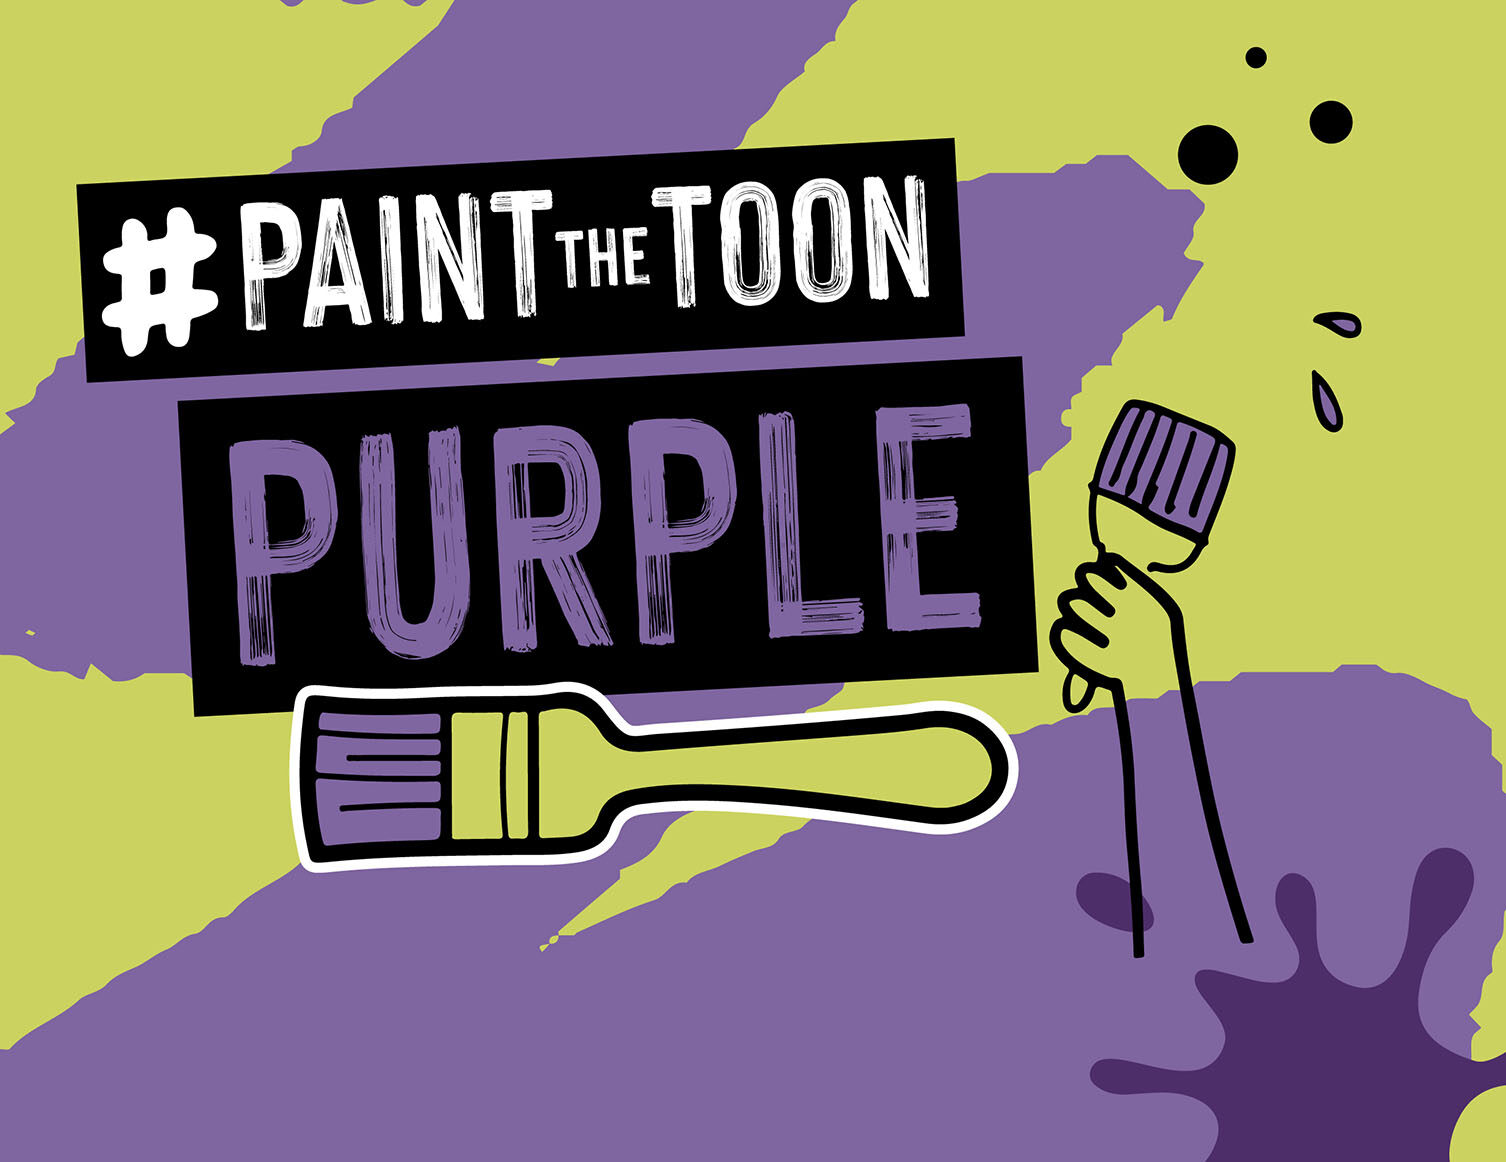 Paint the toon cover photo with splashes